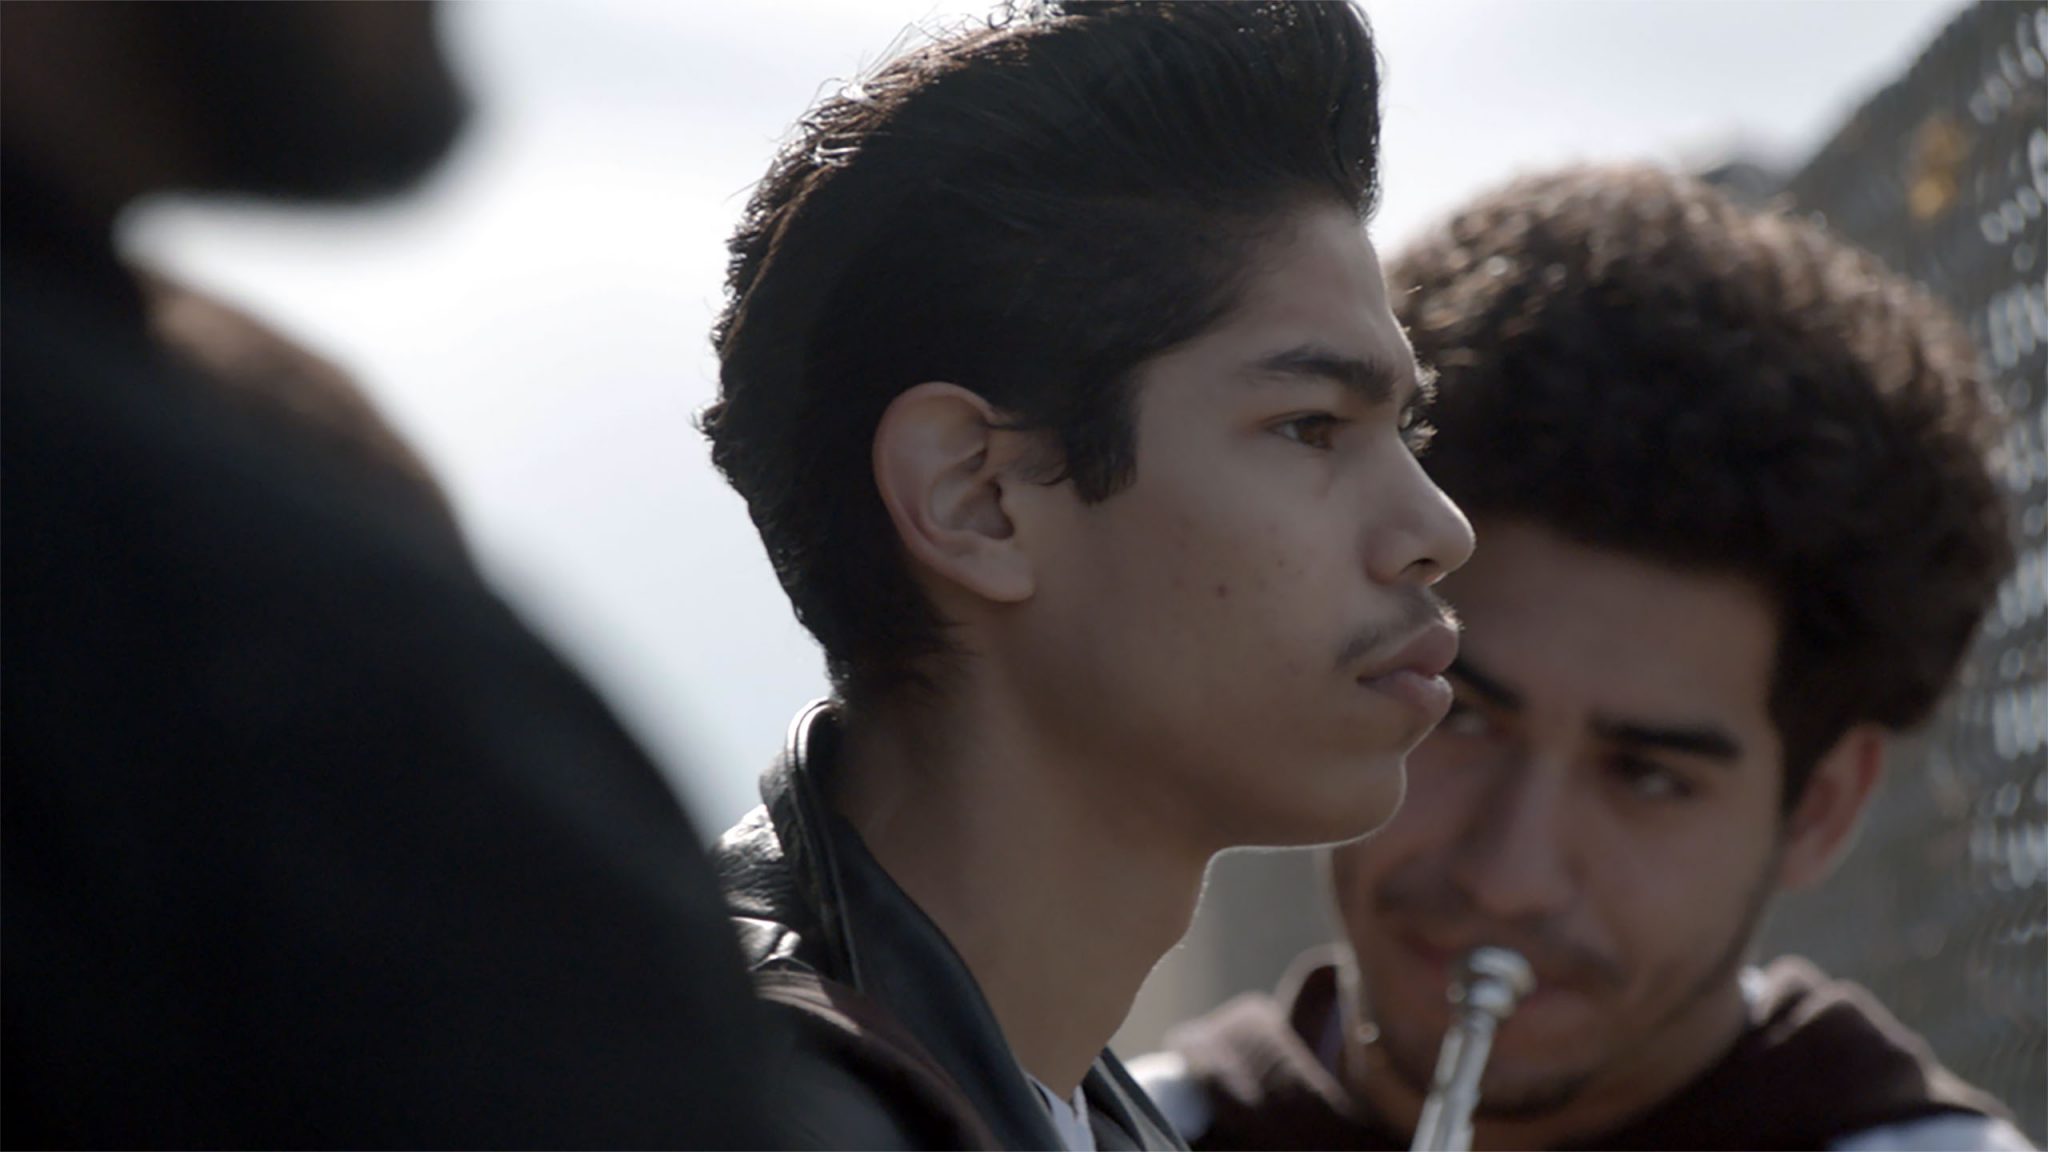 Photo still from ‘The Tuba Thieves,’ showing two high school boys outside at what could be a band practice. One boy is out of focus with a brass instrument held up to his lips. We see the other boy’s side profile and he’s gazing out of frame.